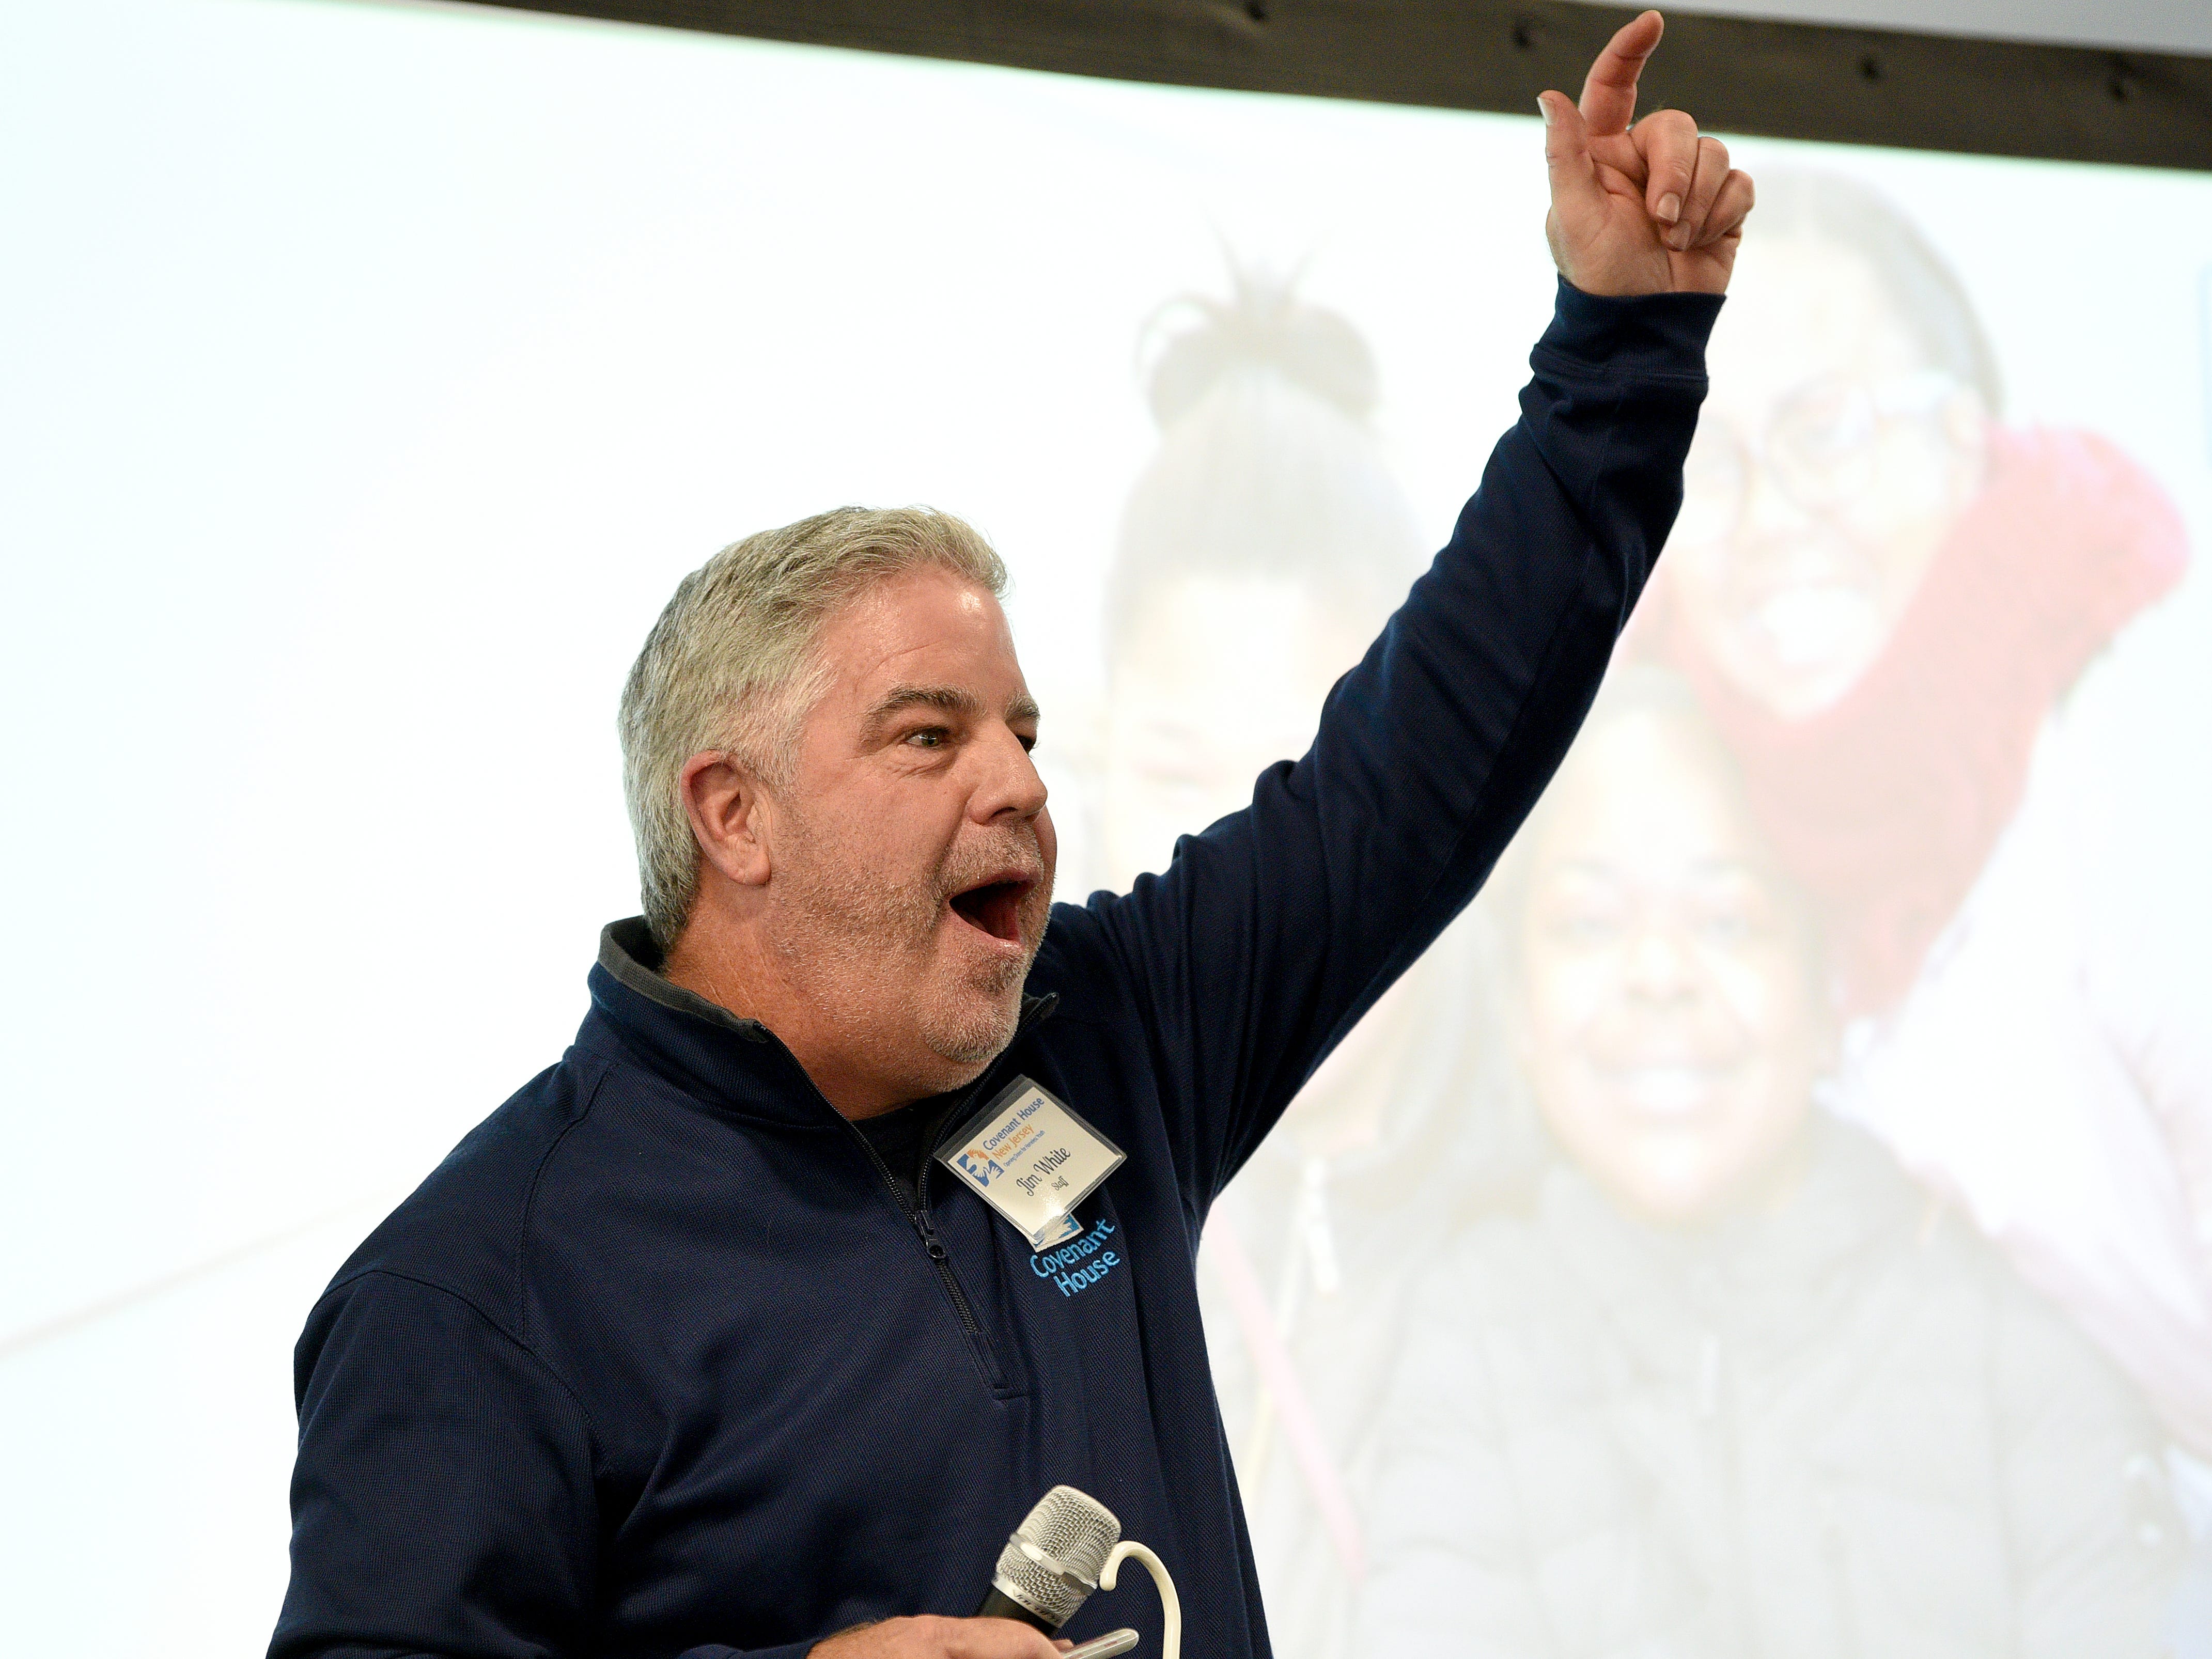 Covenant House holds a Sleep Out Executive Edition in Newark on Thursday November 21, 2019. Jim White gestures when he announces how much money was raised by one person. 